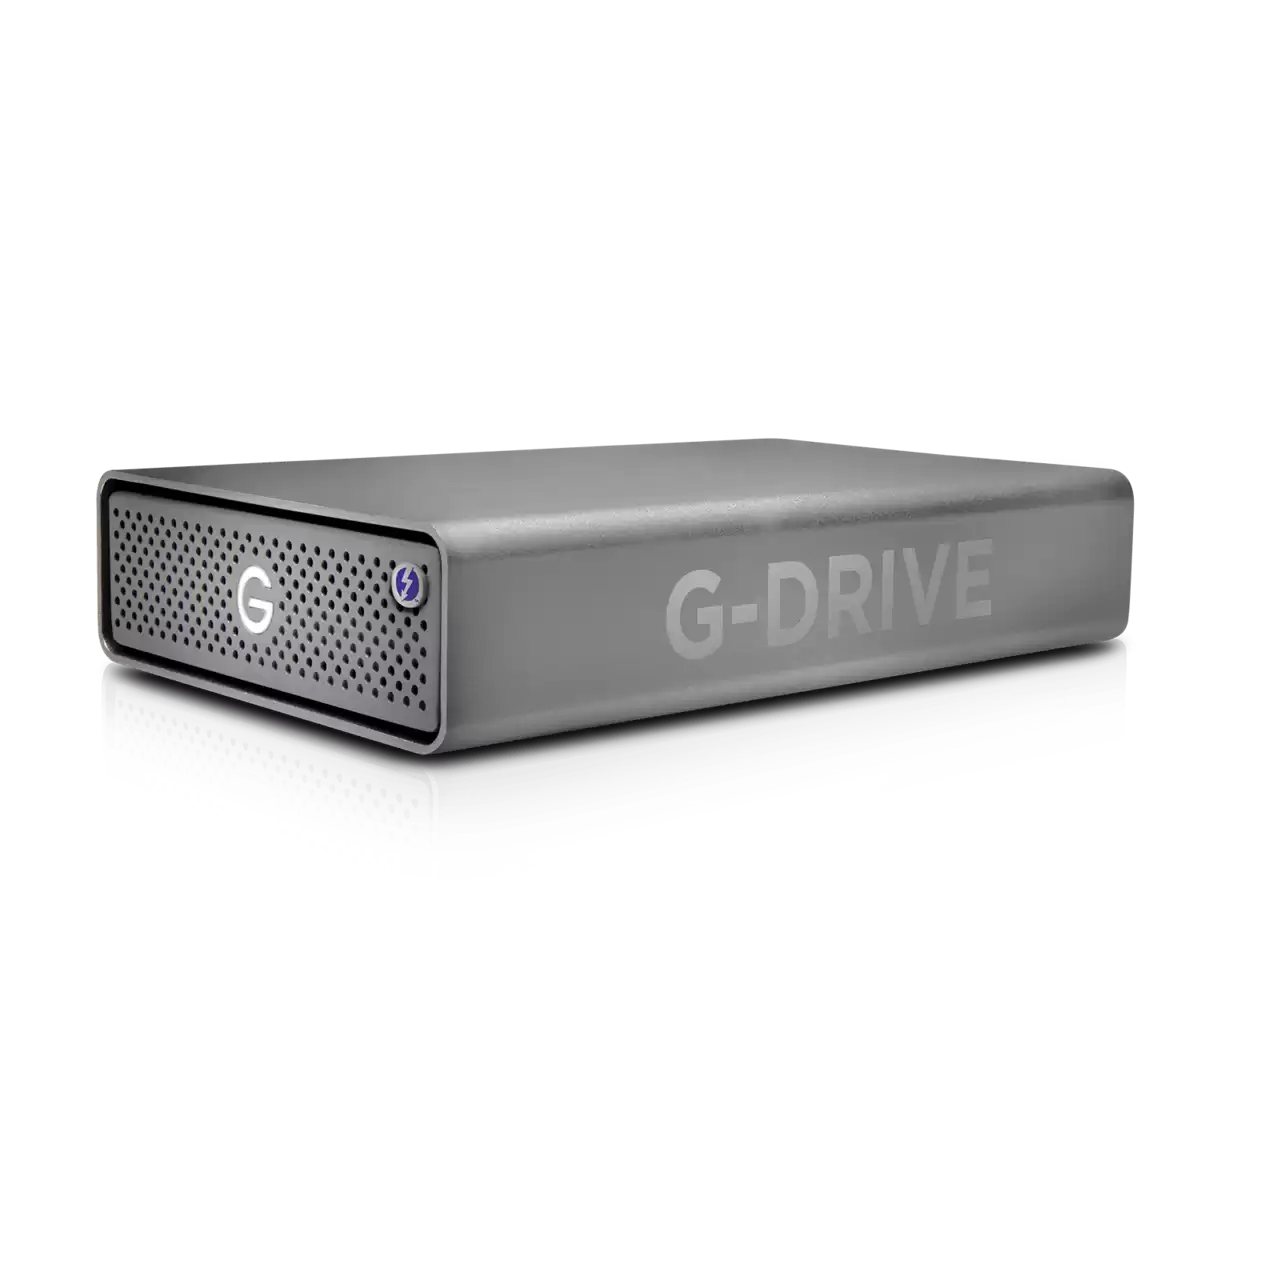 sandisk-pro-g-drive-pro-thunderbolt-3-hdd-angle.png.wdthumb.1280.1280.png